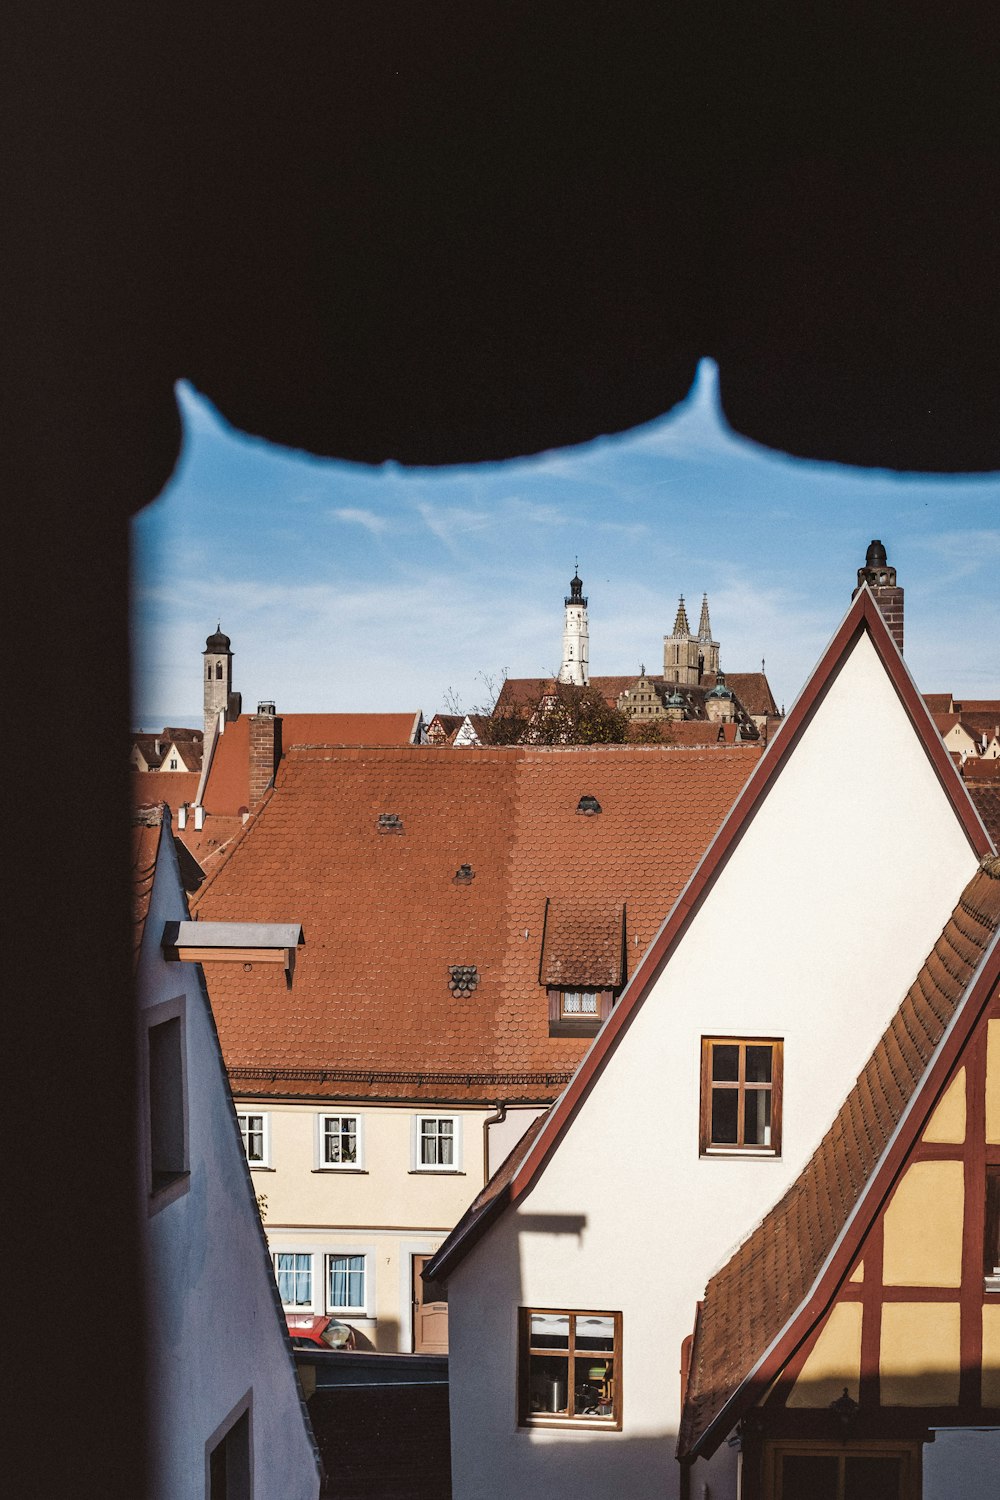 a view of some buildings from a window